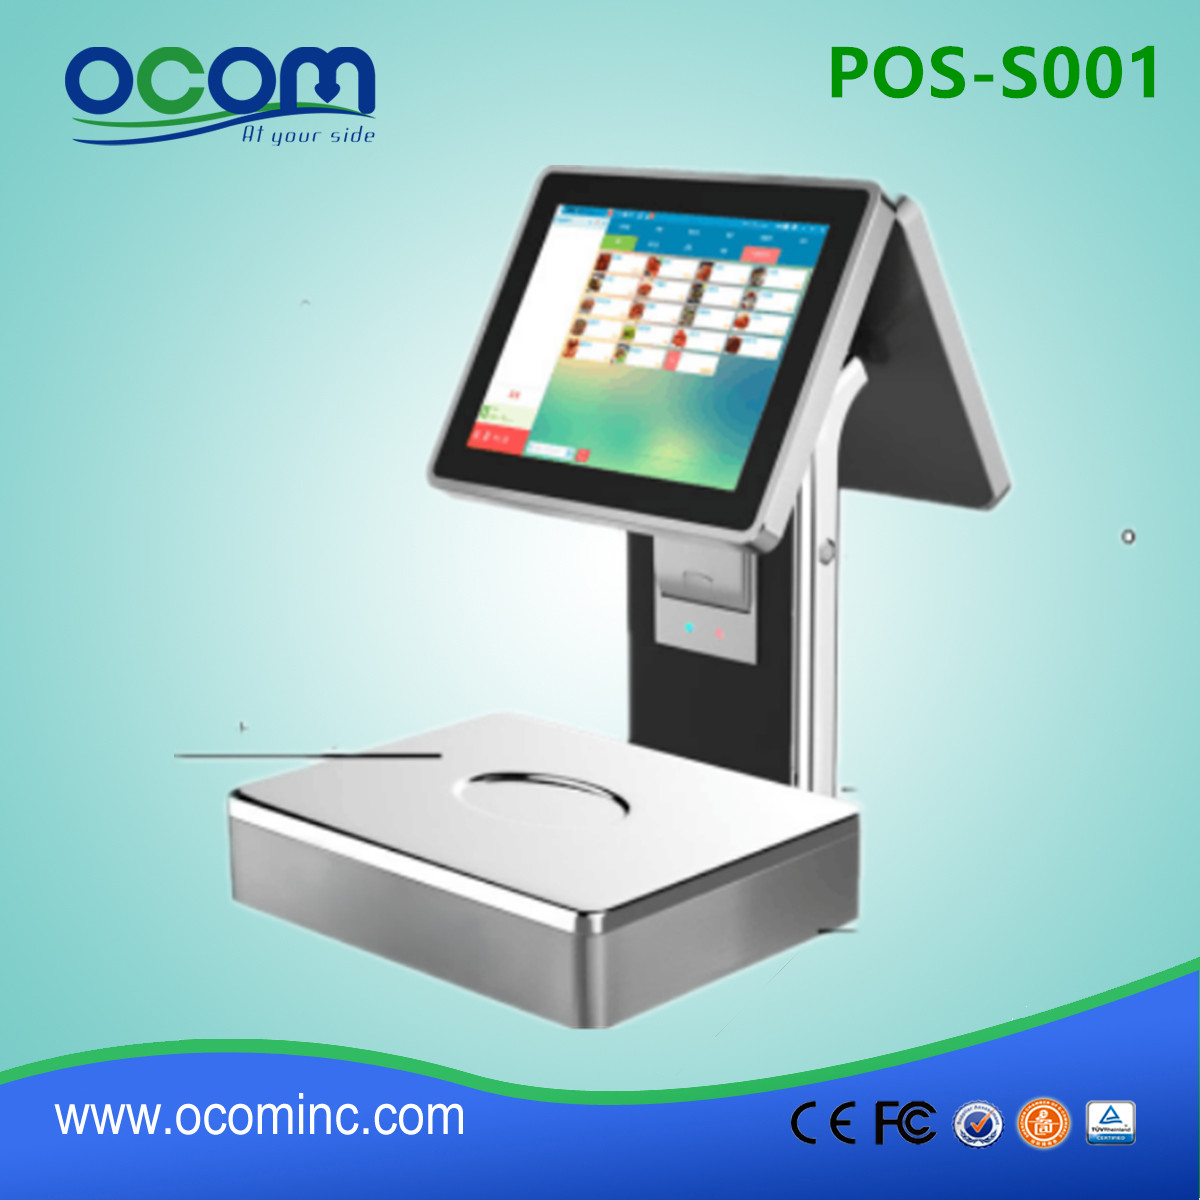 POS-S001-12" Dual screen POS scale with thermal printer